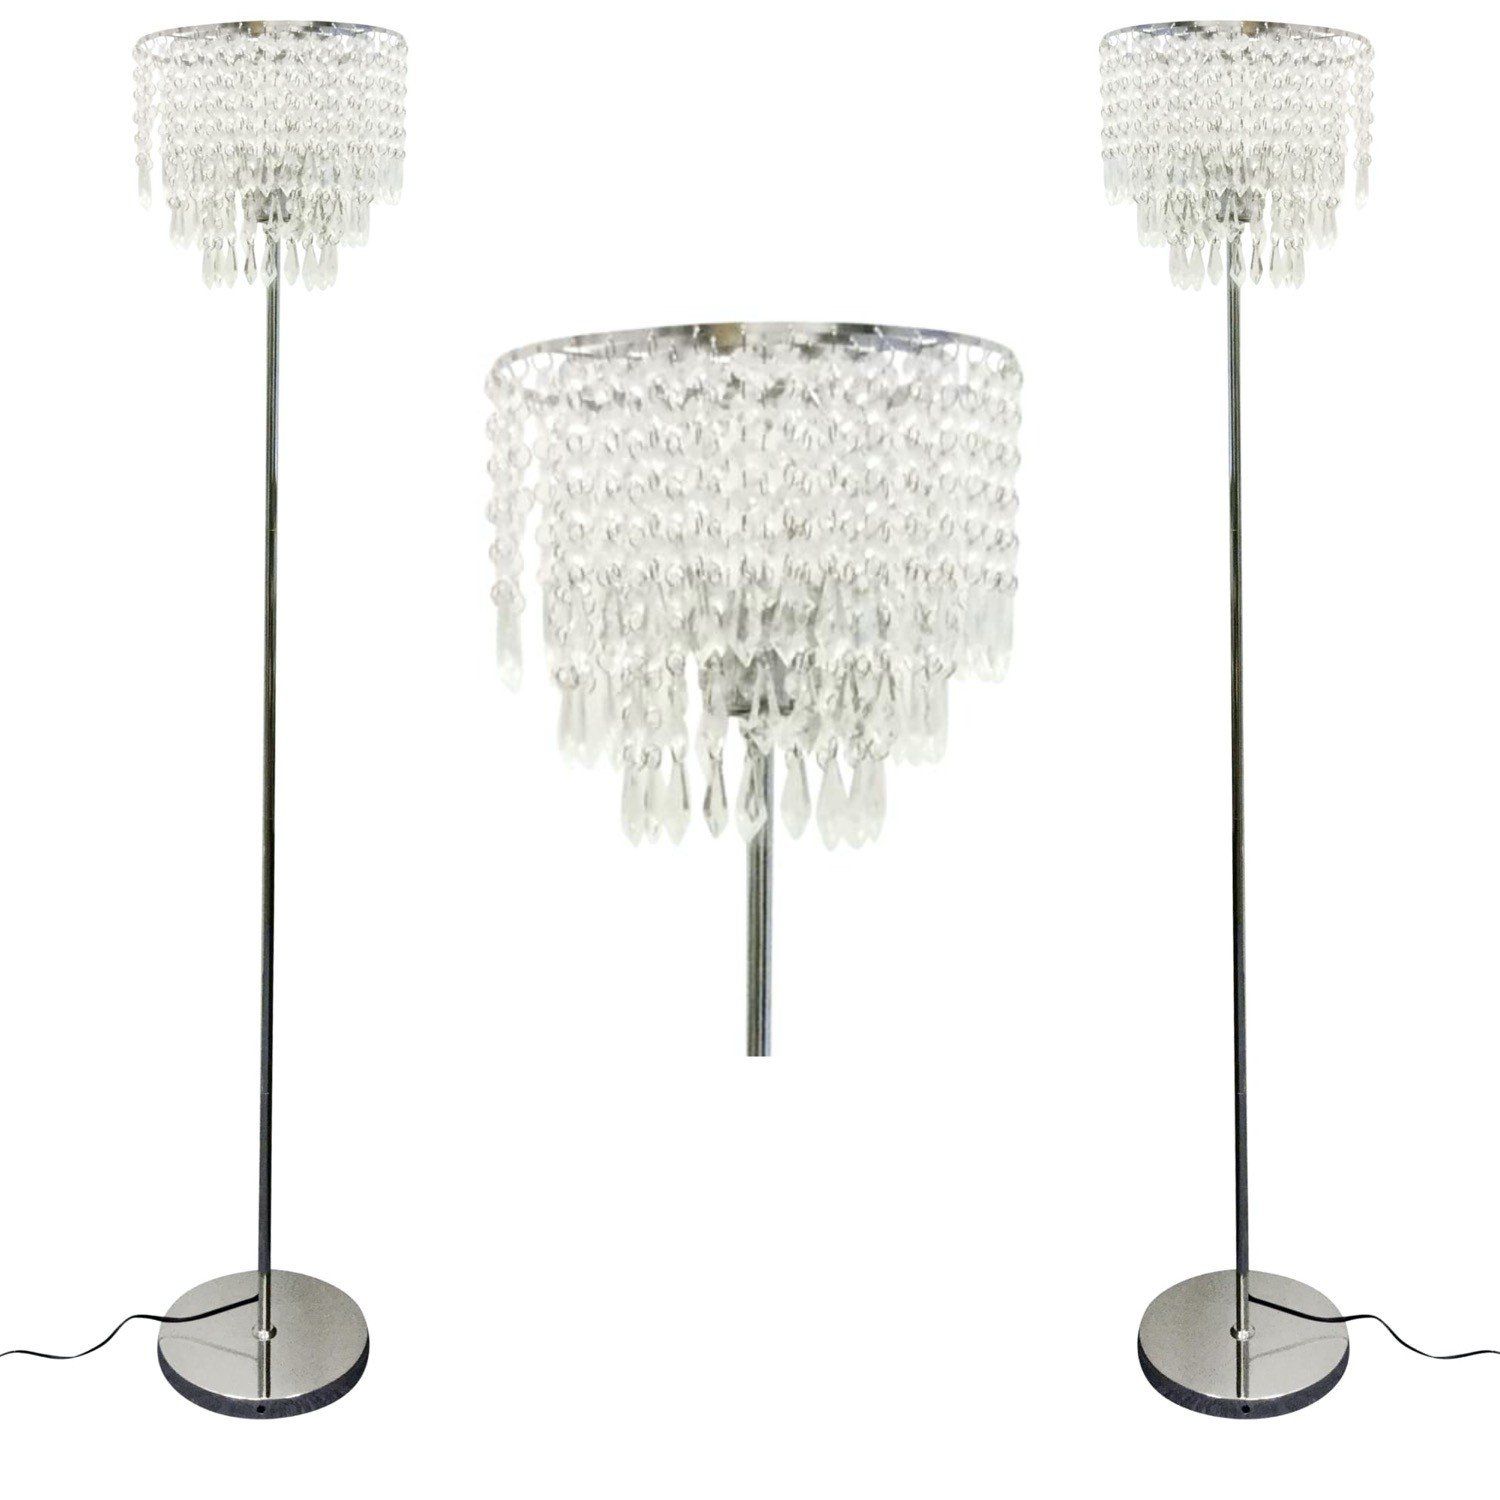 Set Of 2 Chrome And Acrylic Crystal Jewelled Floor Lamps In Chrome Crystal Tower Floor Lamps (Photo 15 of 15)